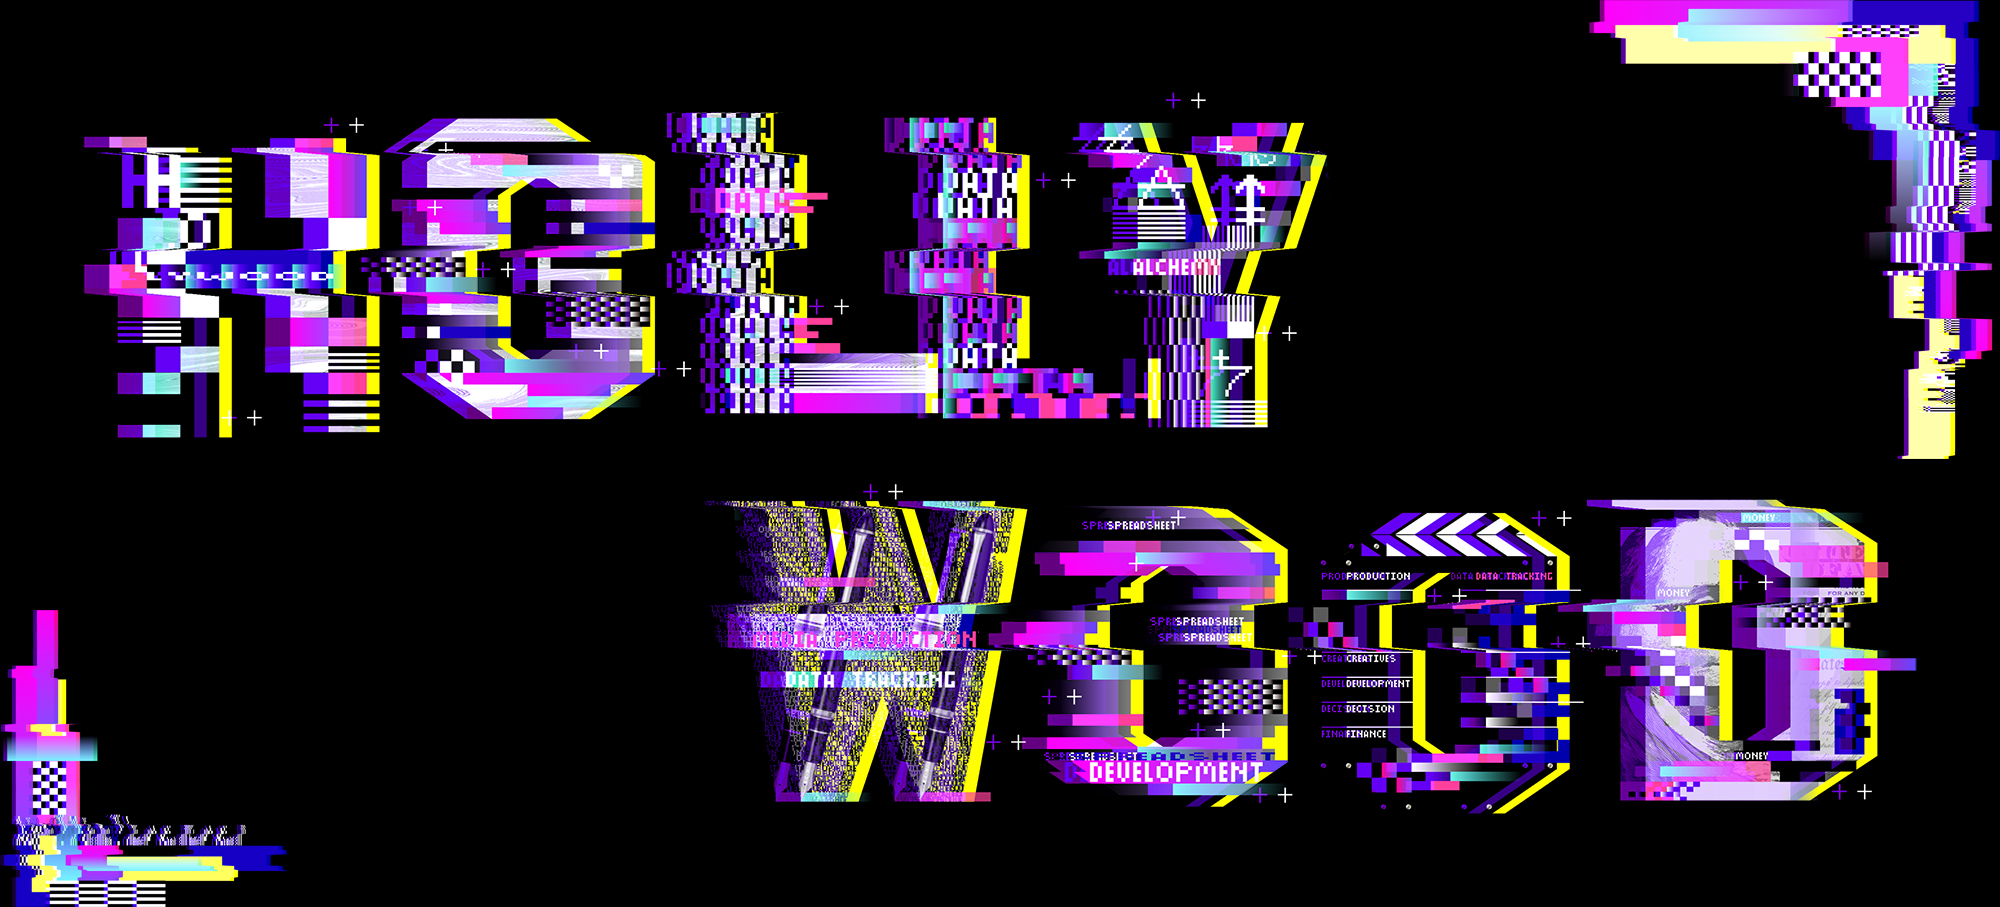 Distorted digital image of the word "Hollywood" against a black background. Other similarly designed glitchy areas flank the words.